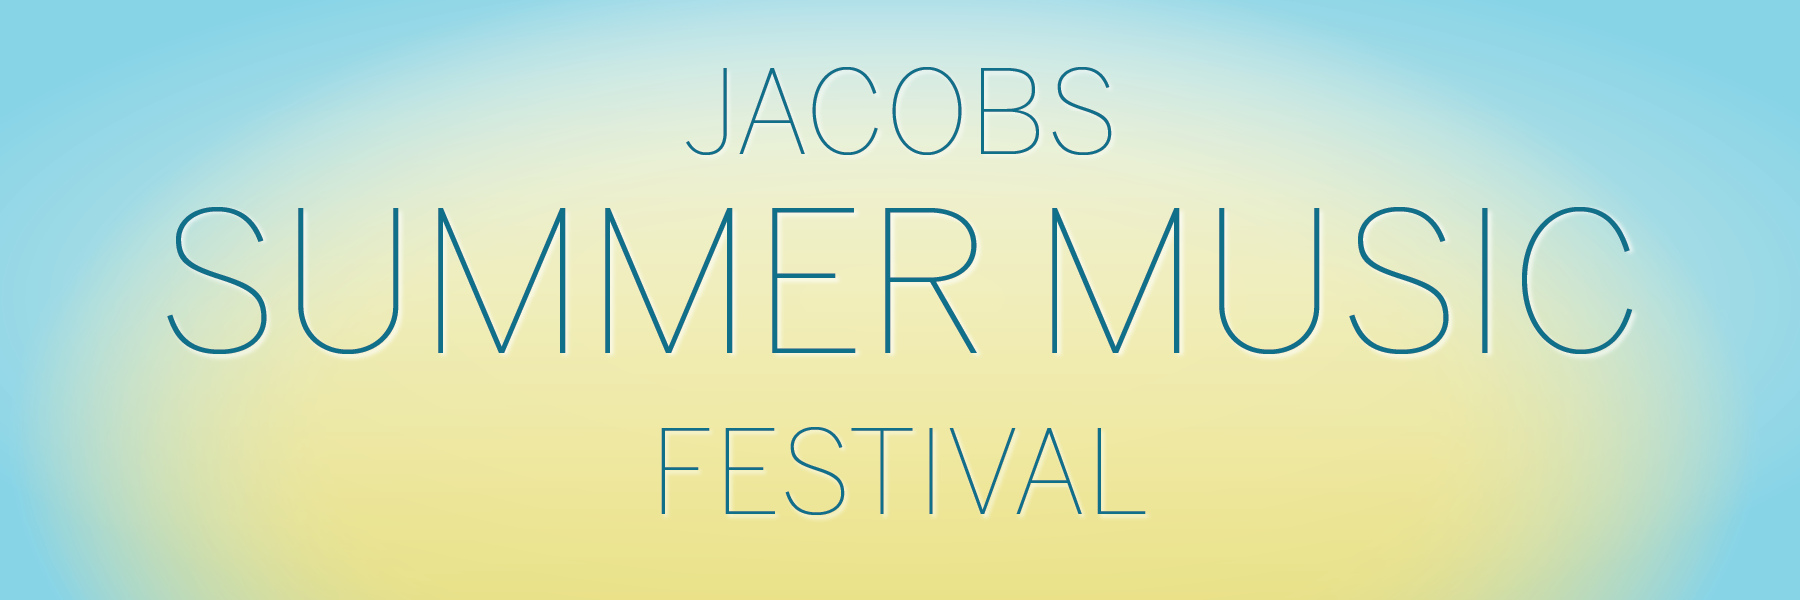 JACOBS SUMMER MUSIC FESTIVAL on a light yellow and sky blue background